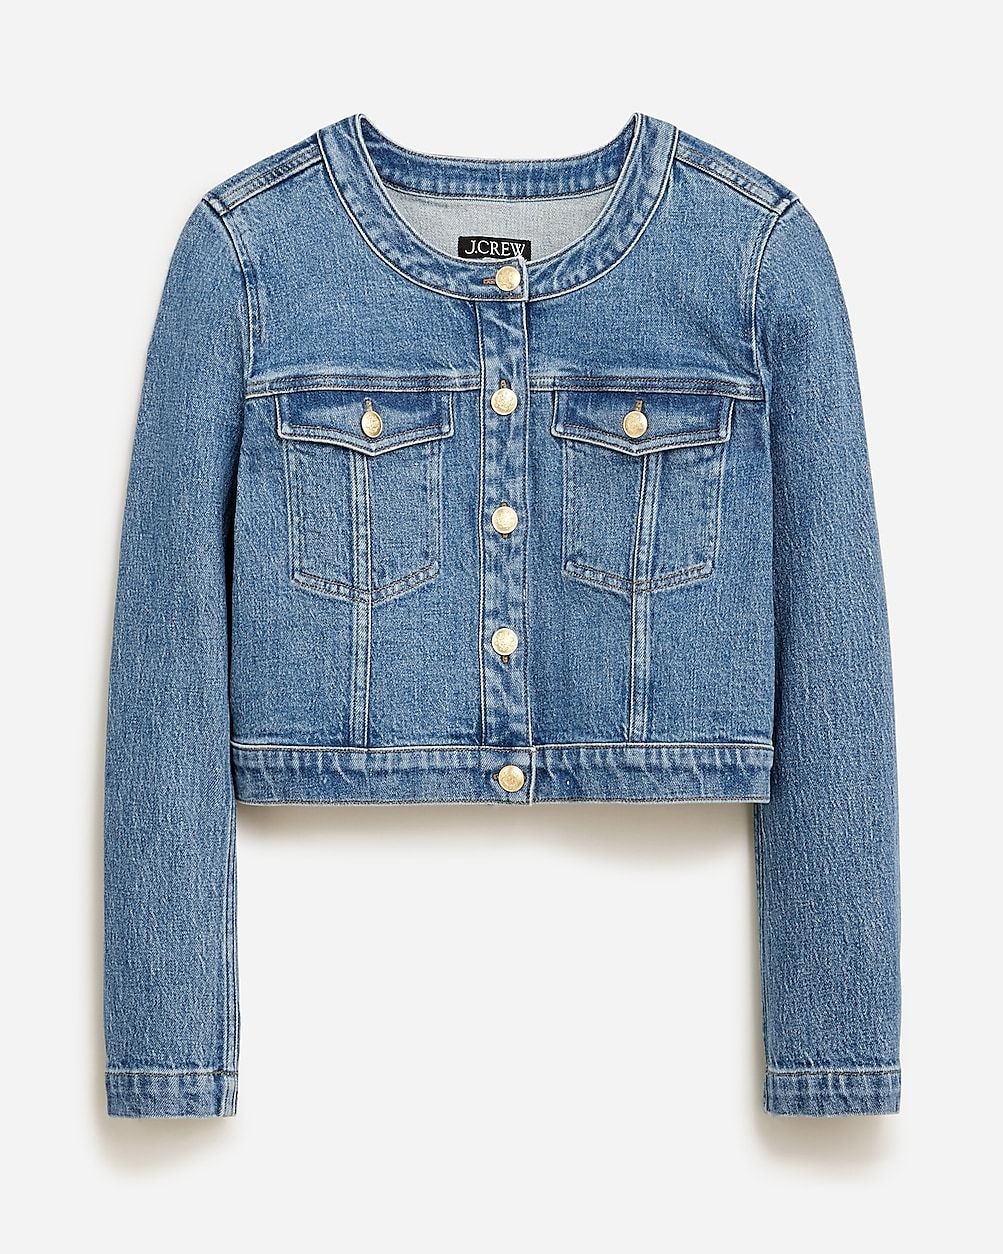 Extra 60% off sale styles with code SHOPSALE | J.Crew US